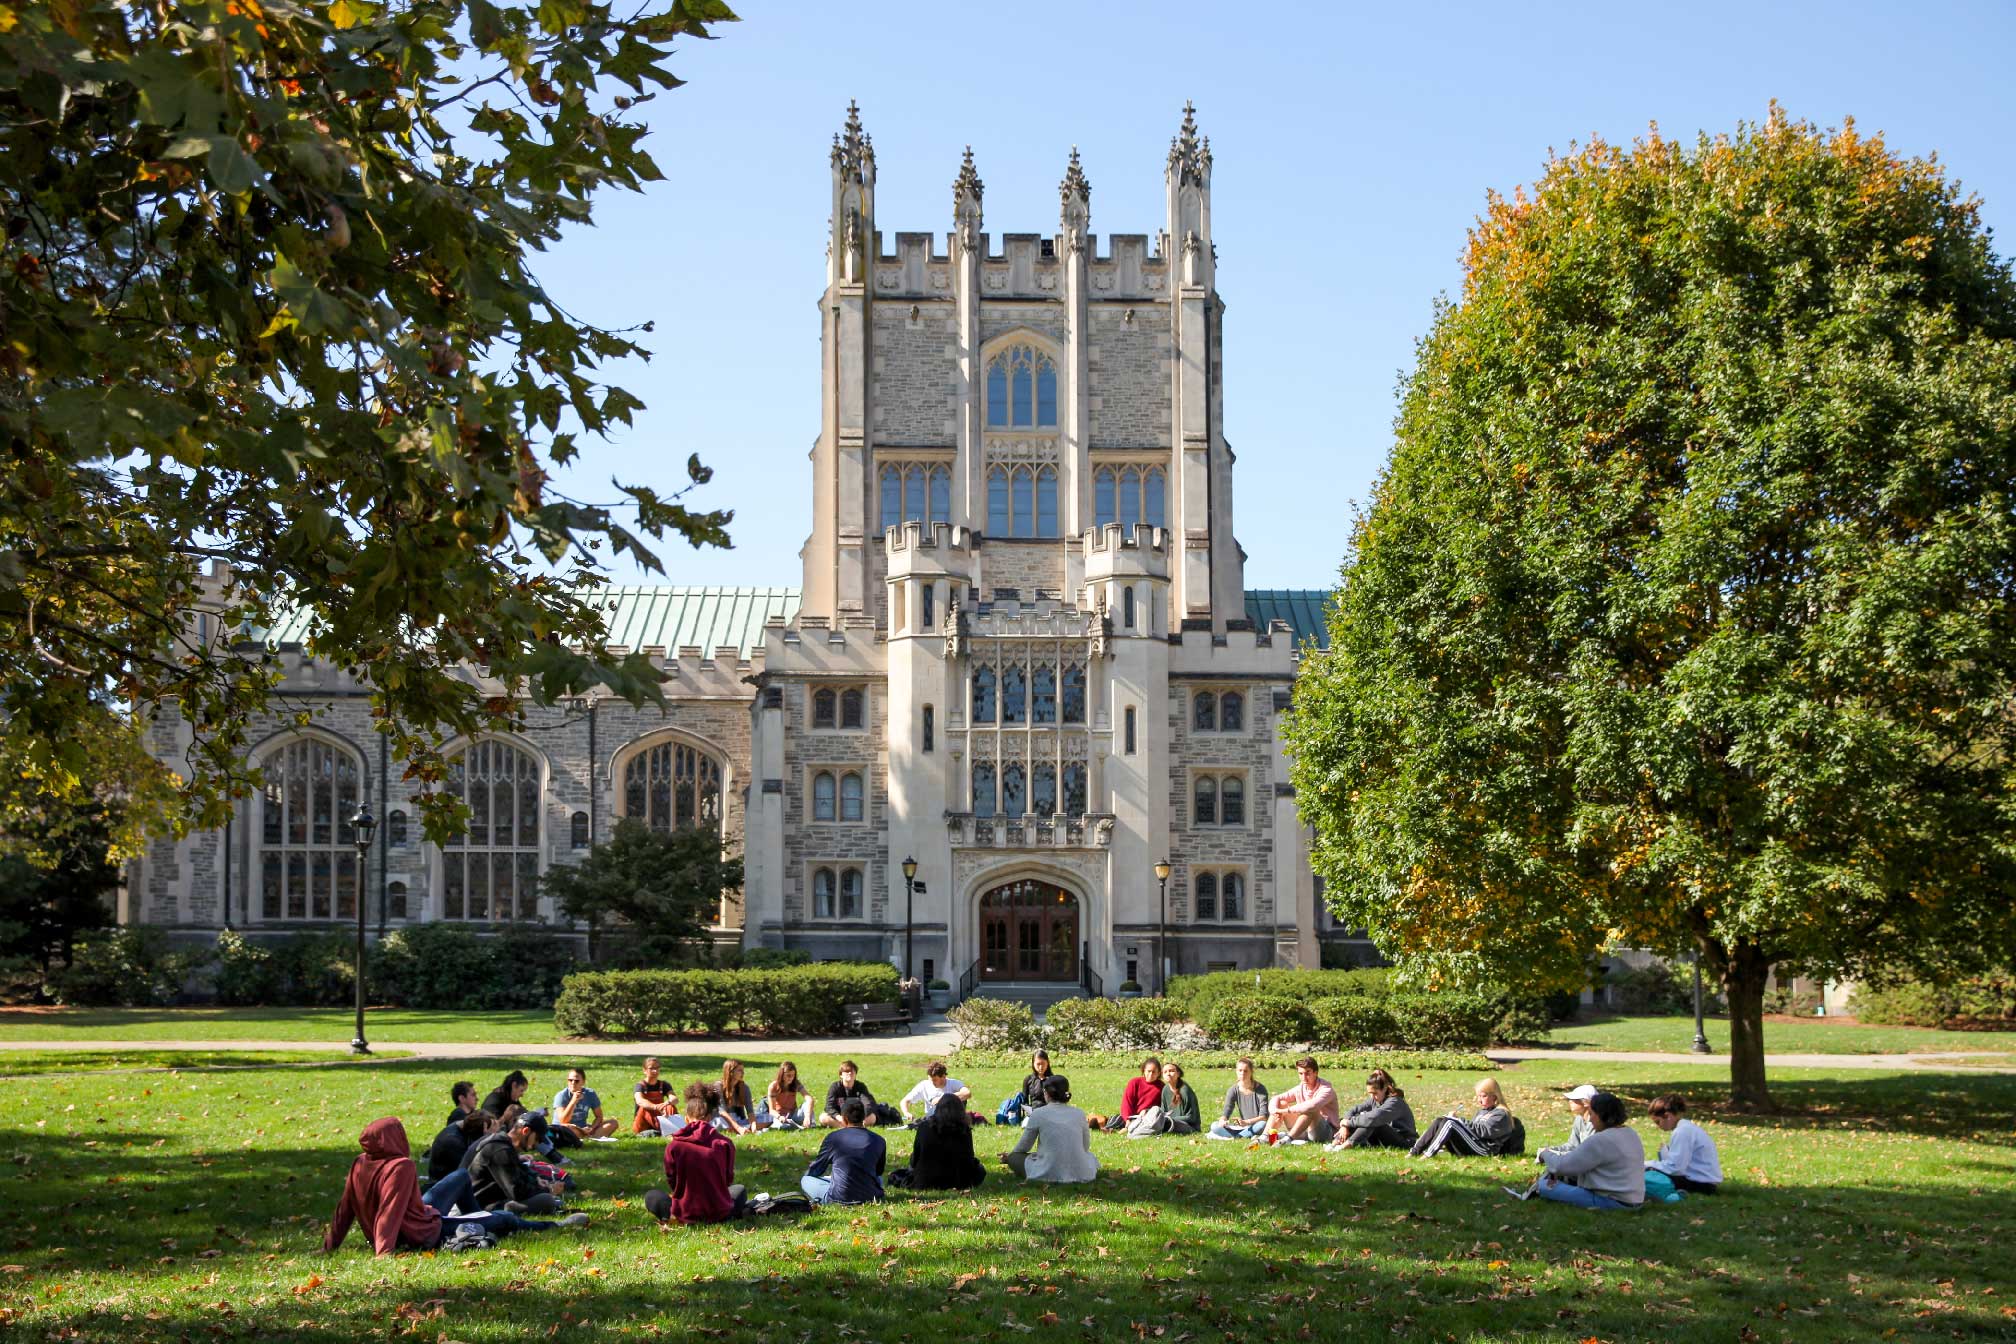 Large group of students seated on a lawn in front of the Thompson Memorial Library on Vassar campus